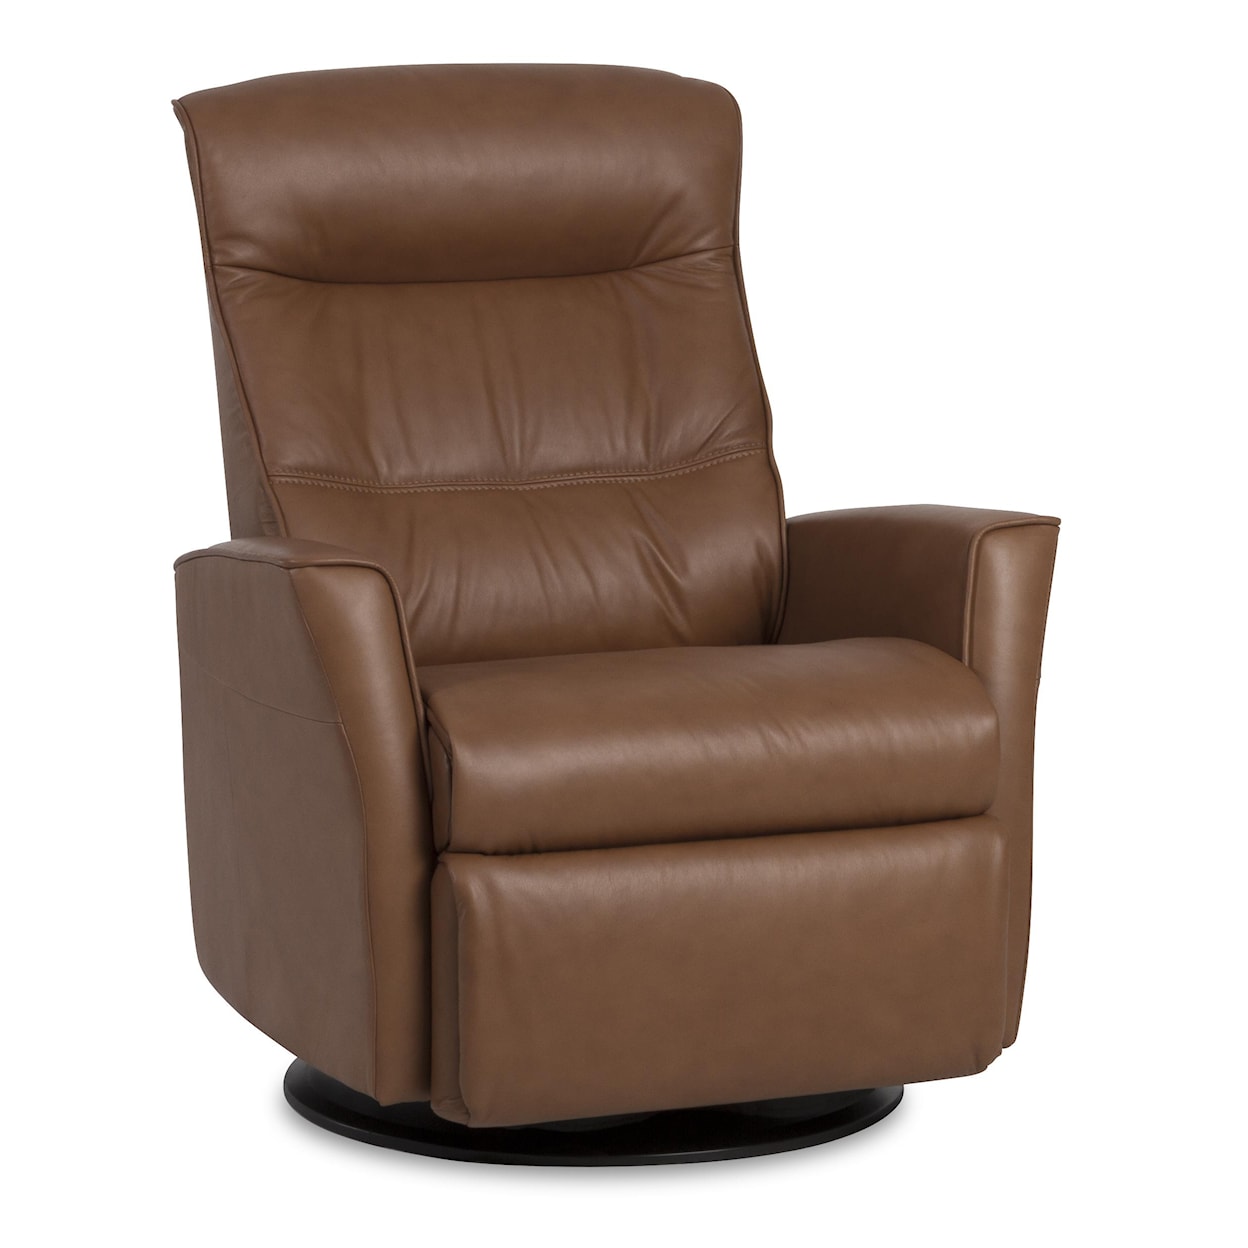 IMG Norway Crown Large Relaxer Recliner